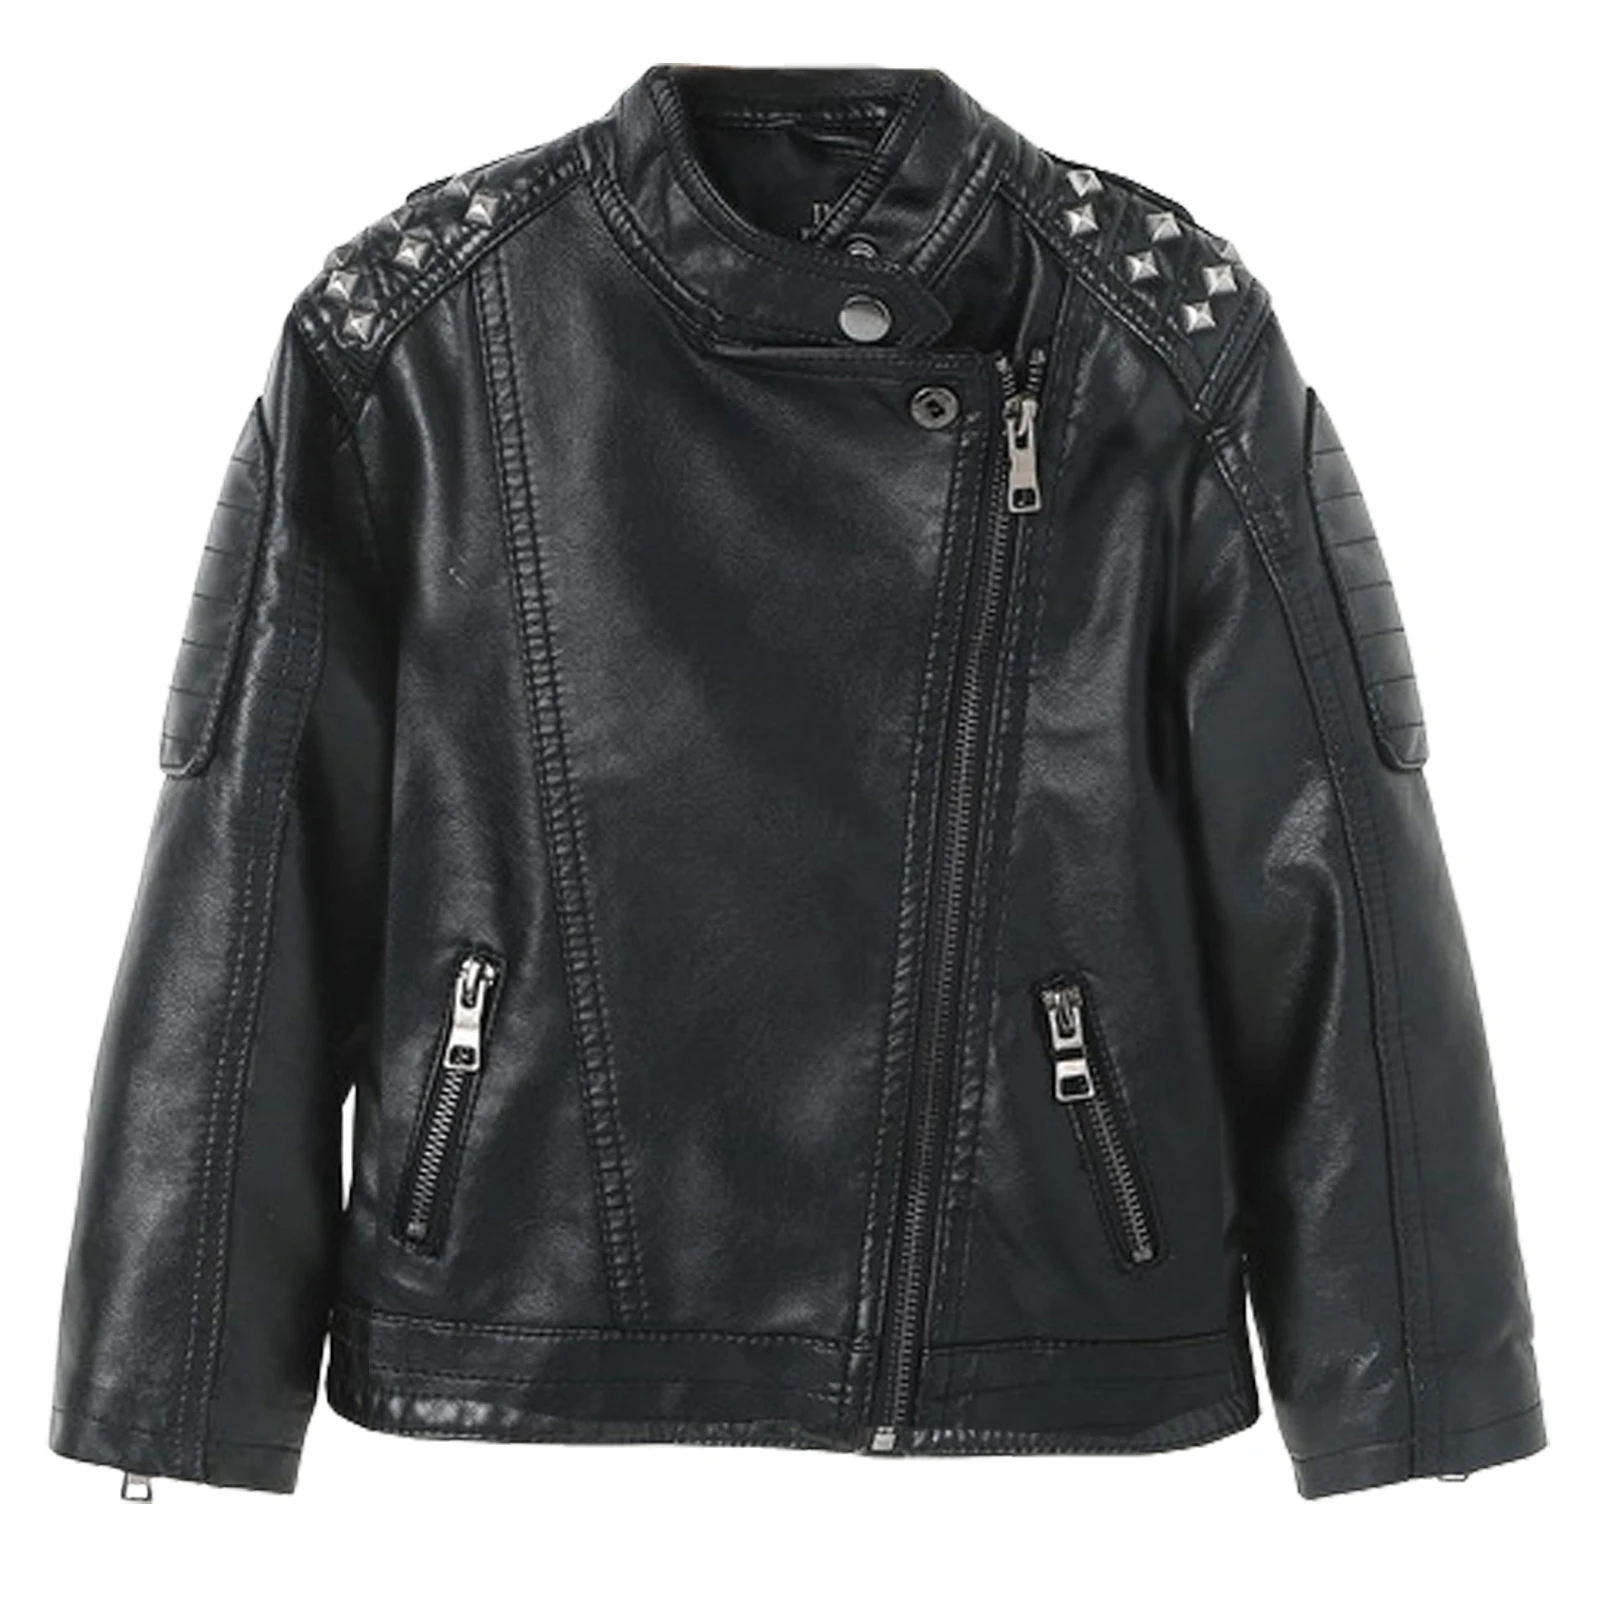 

Boys Leather Jacket Children's PU Jacket with Rivets Motorcycle Retro Biker Jacket Teen Kids Faux Leather Jackets Spring Autumn